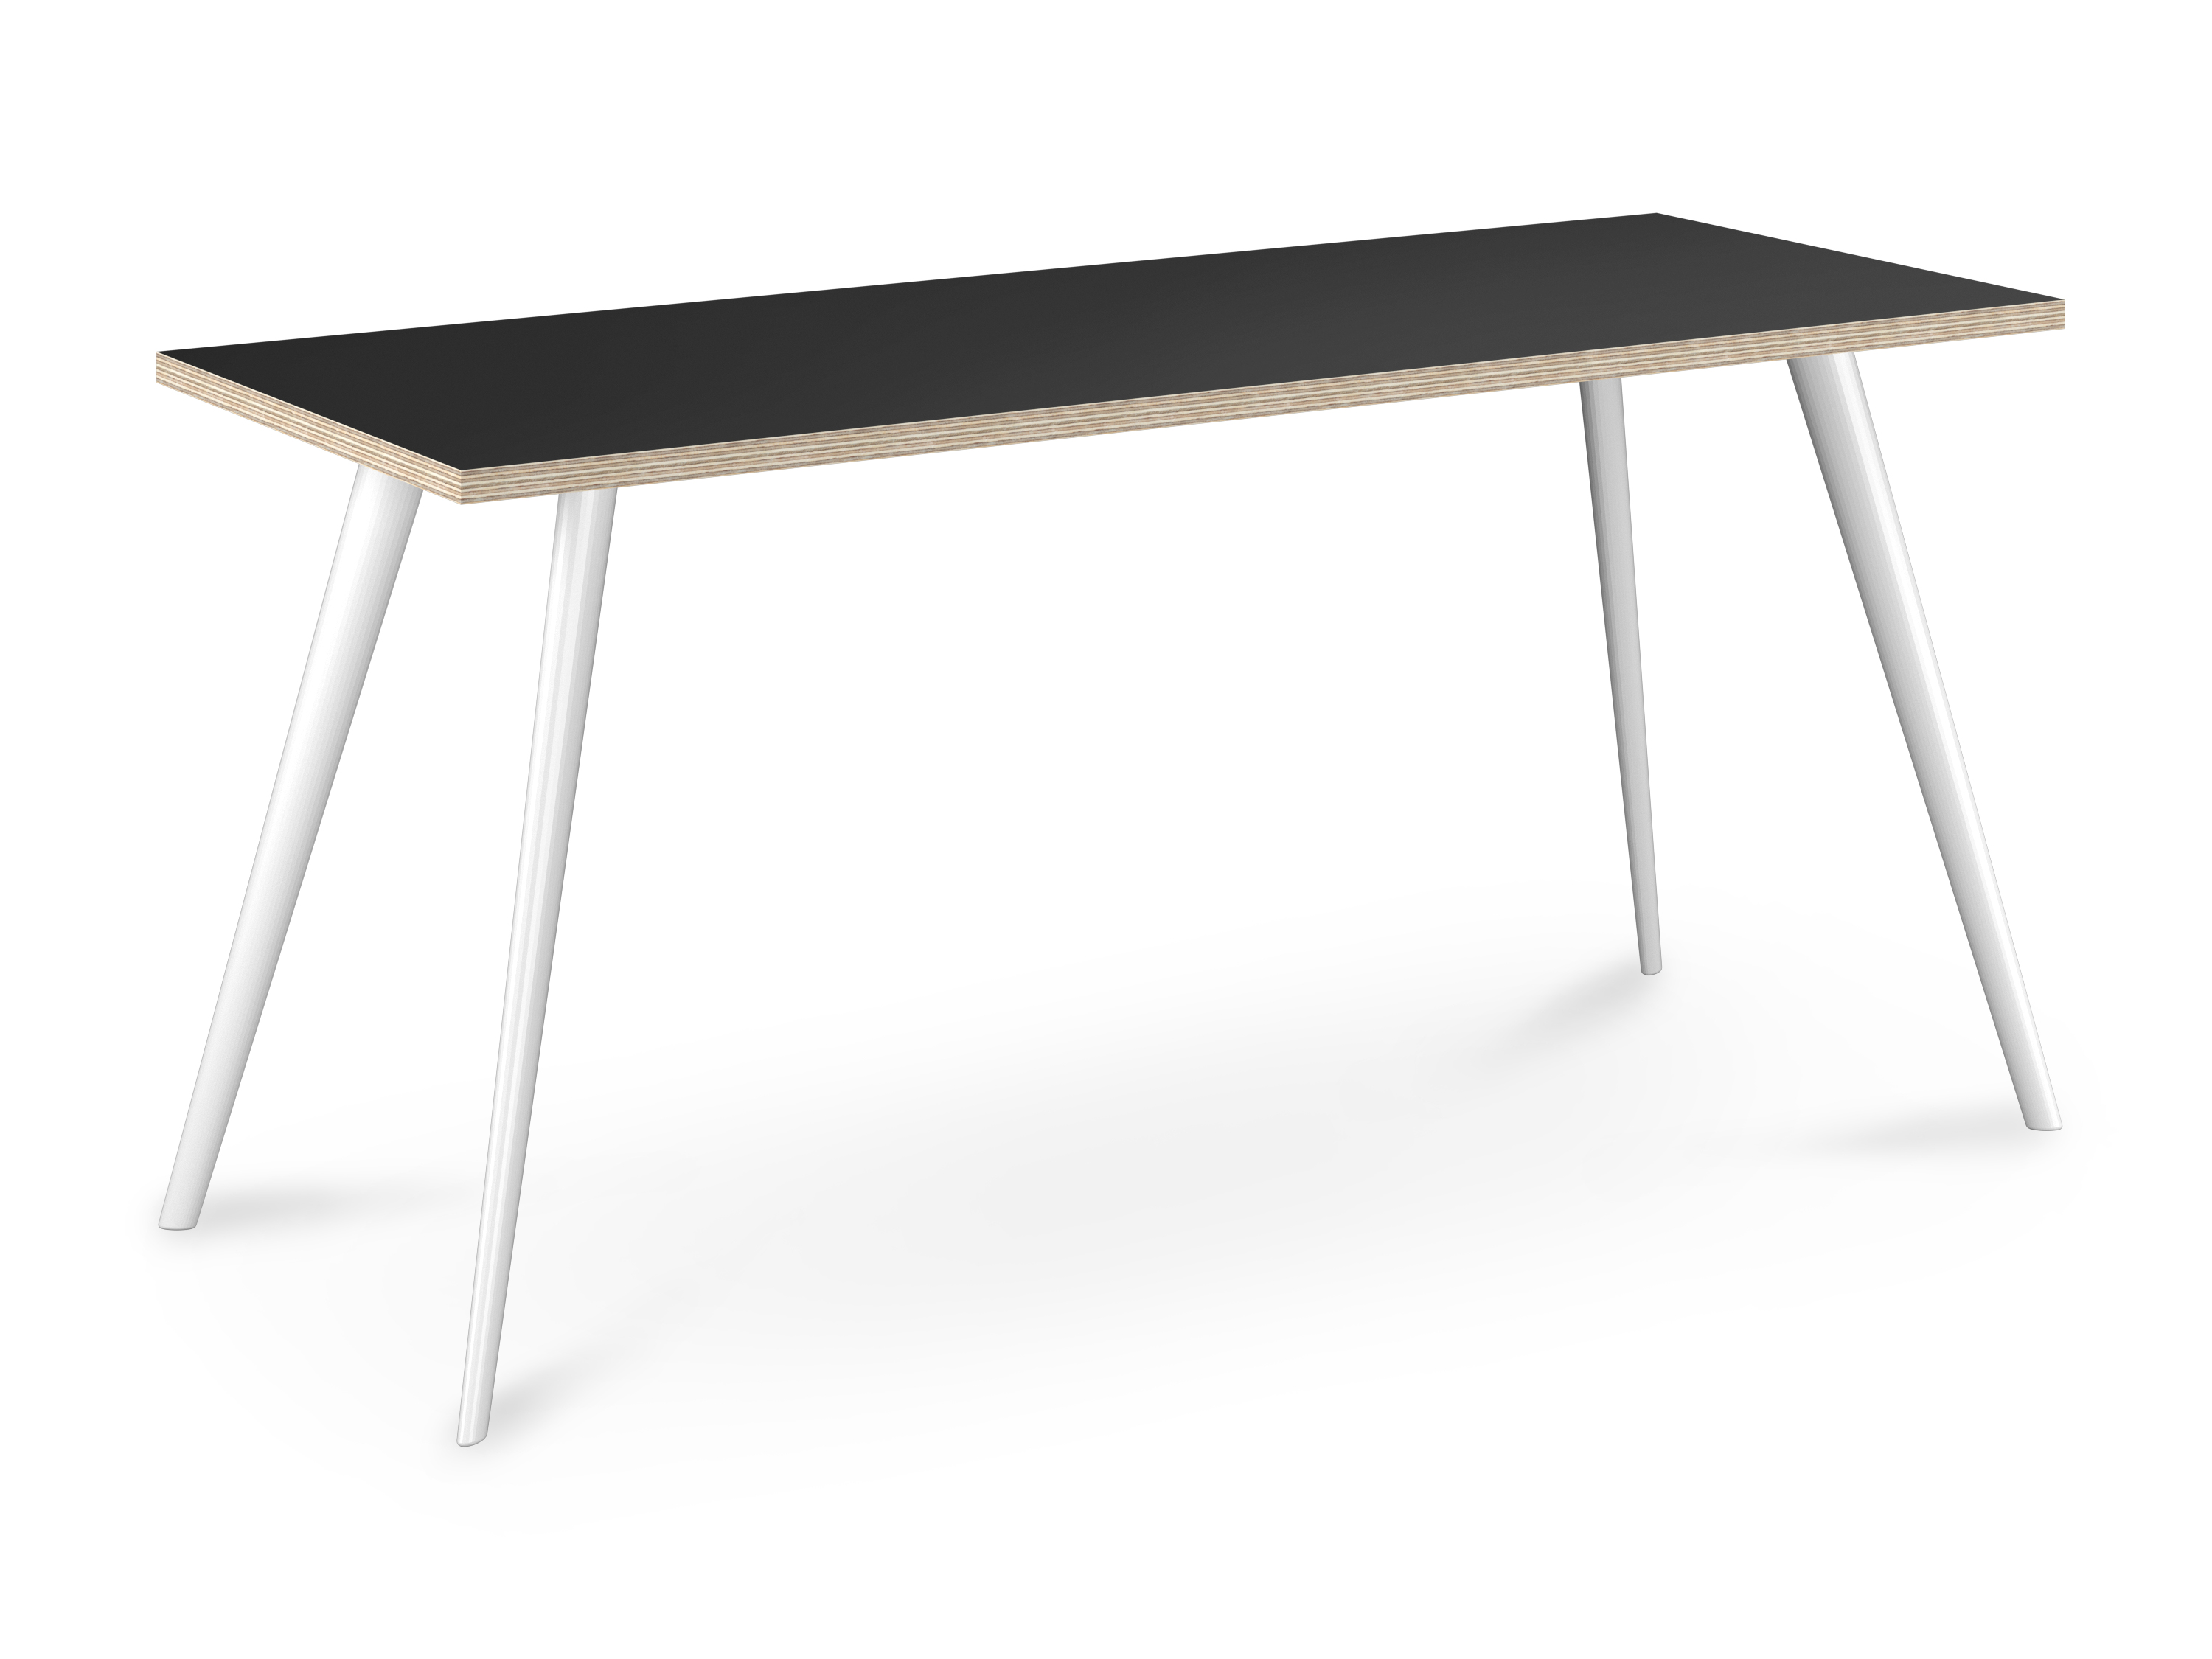 WS - Air desk - White legs, Anthracite Acrylic Ply